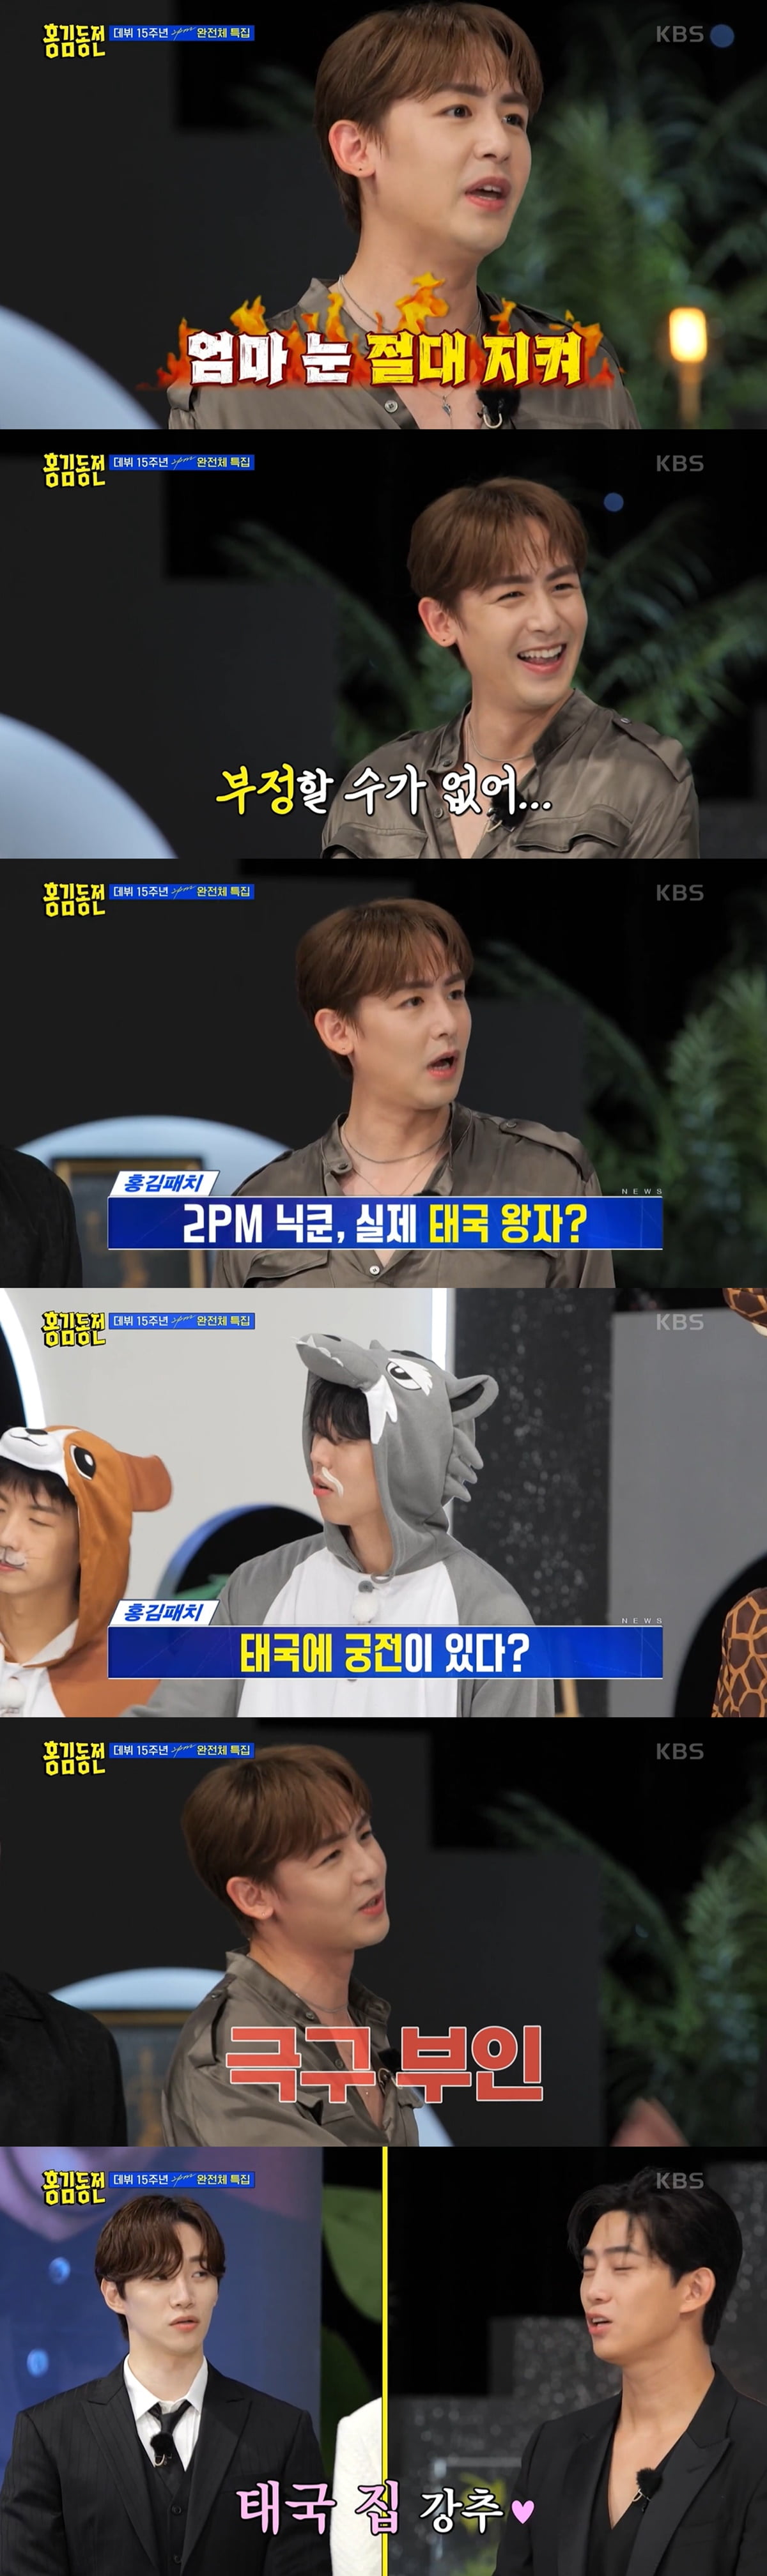 2PM Nichkhun says “Mom should never see my Hollywood entry”